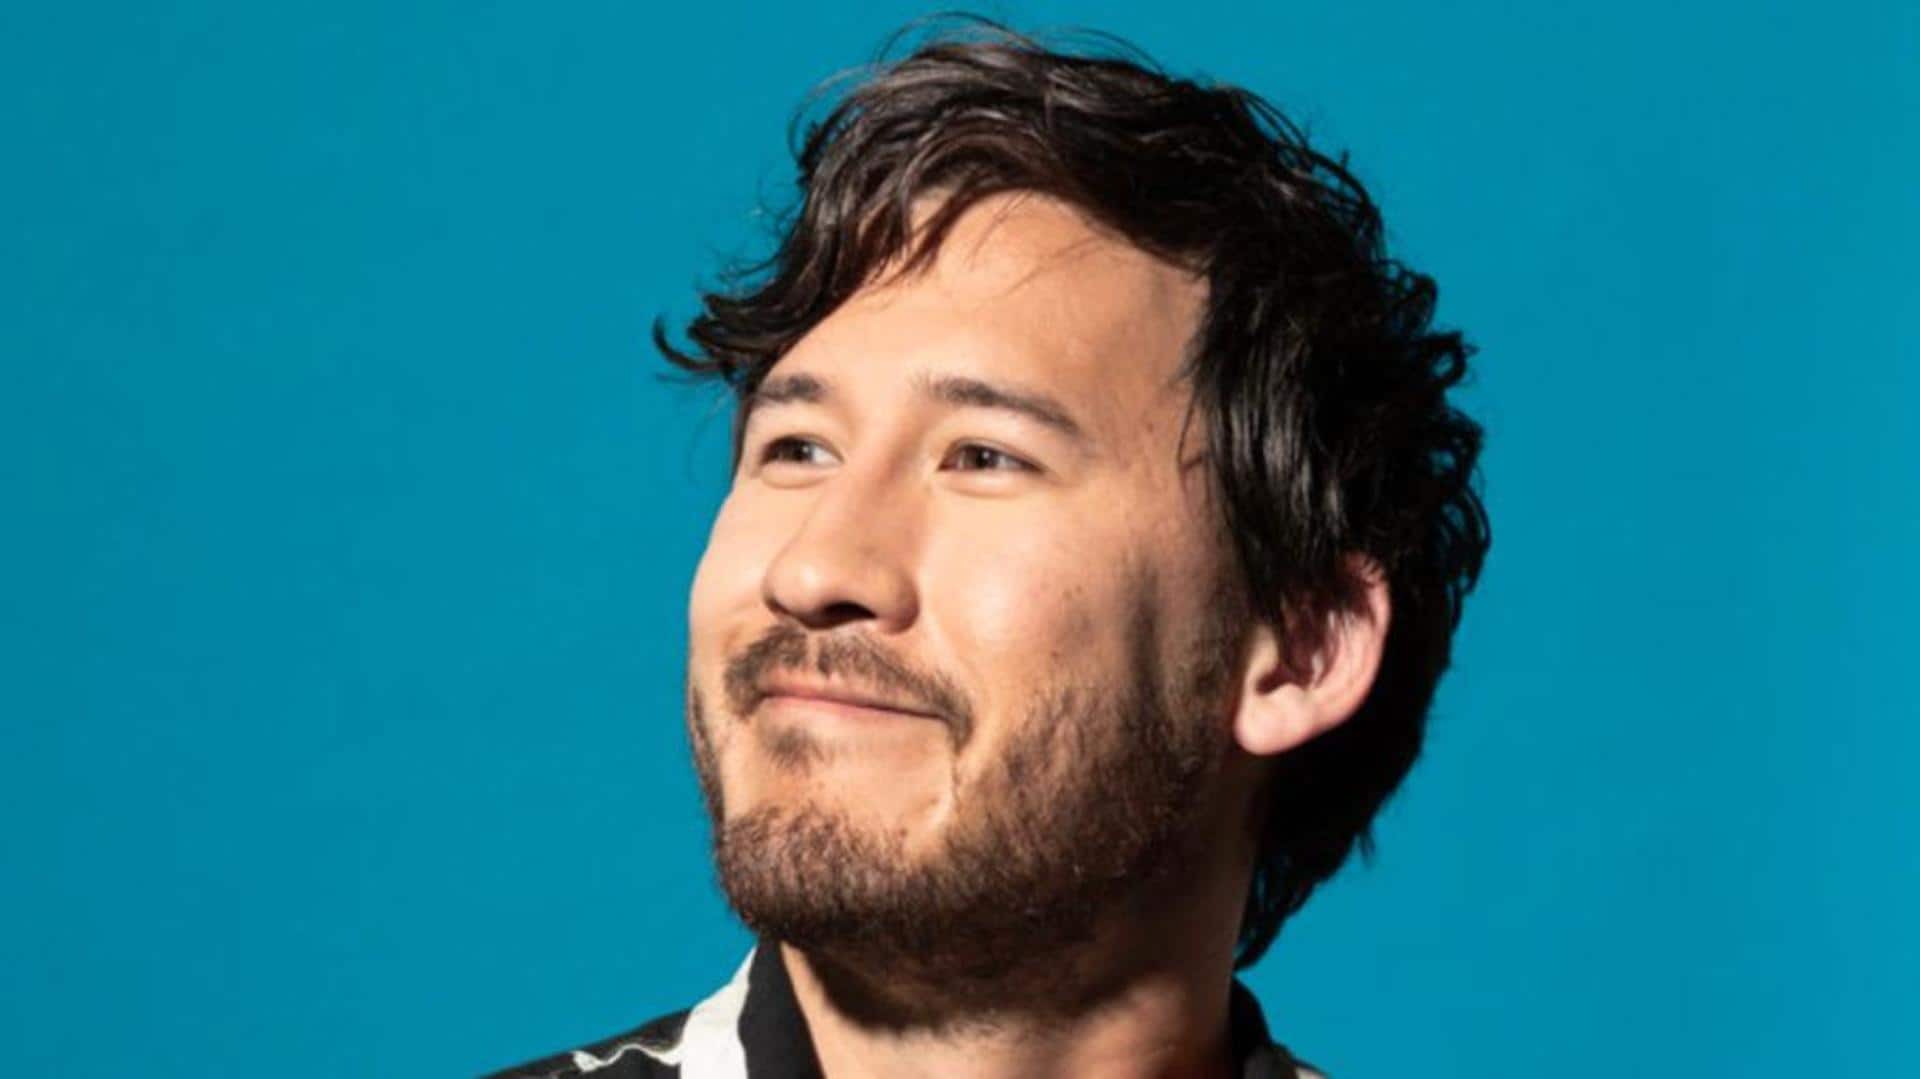 YouTuber Markiplier turns director; other YouTubers who made films